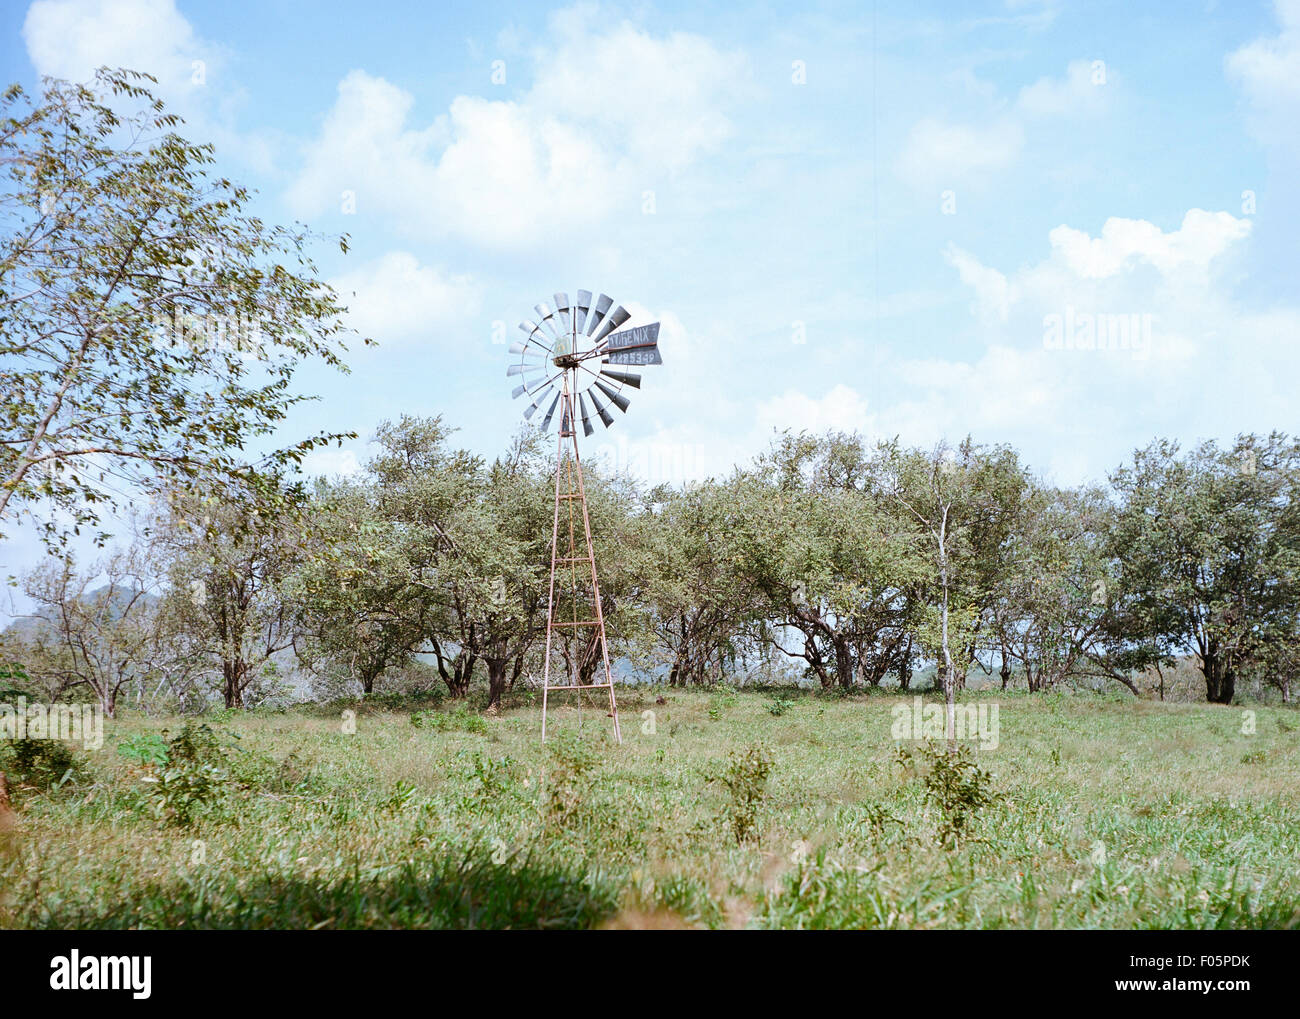 Old farm water pumping wind mill out of focus in the background in a pasture field Stock Photo